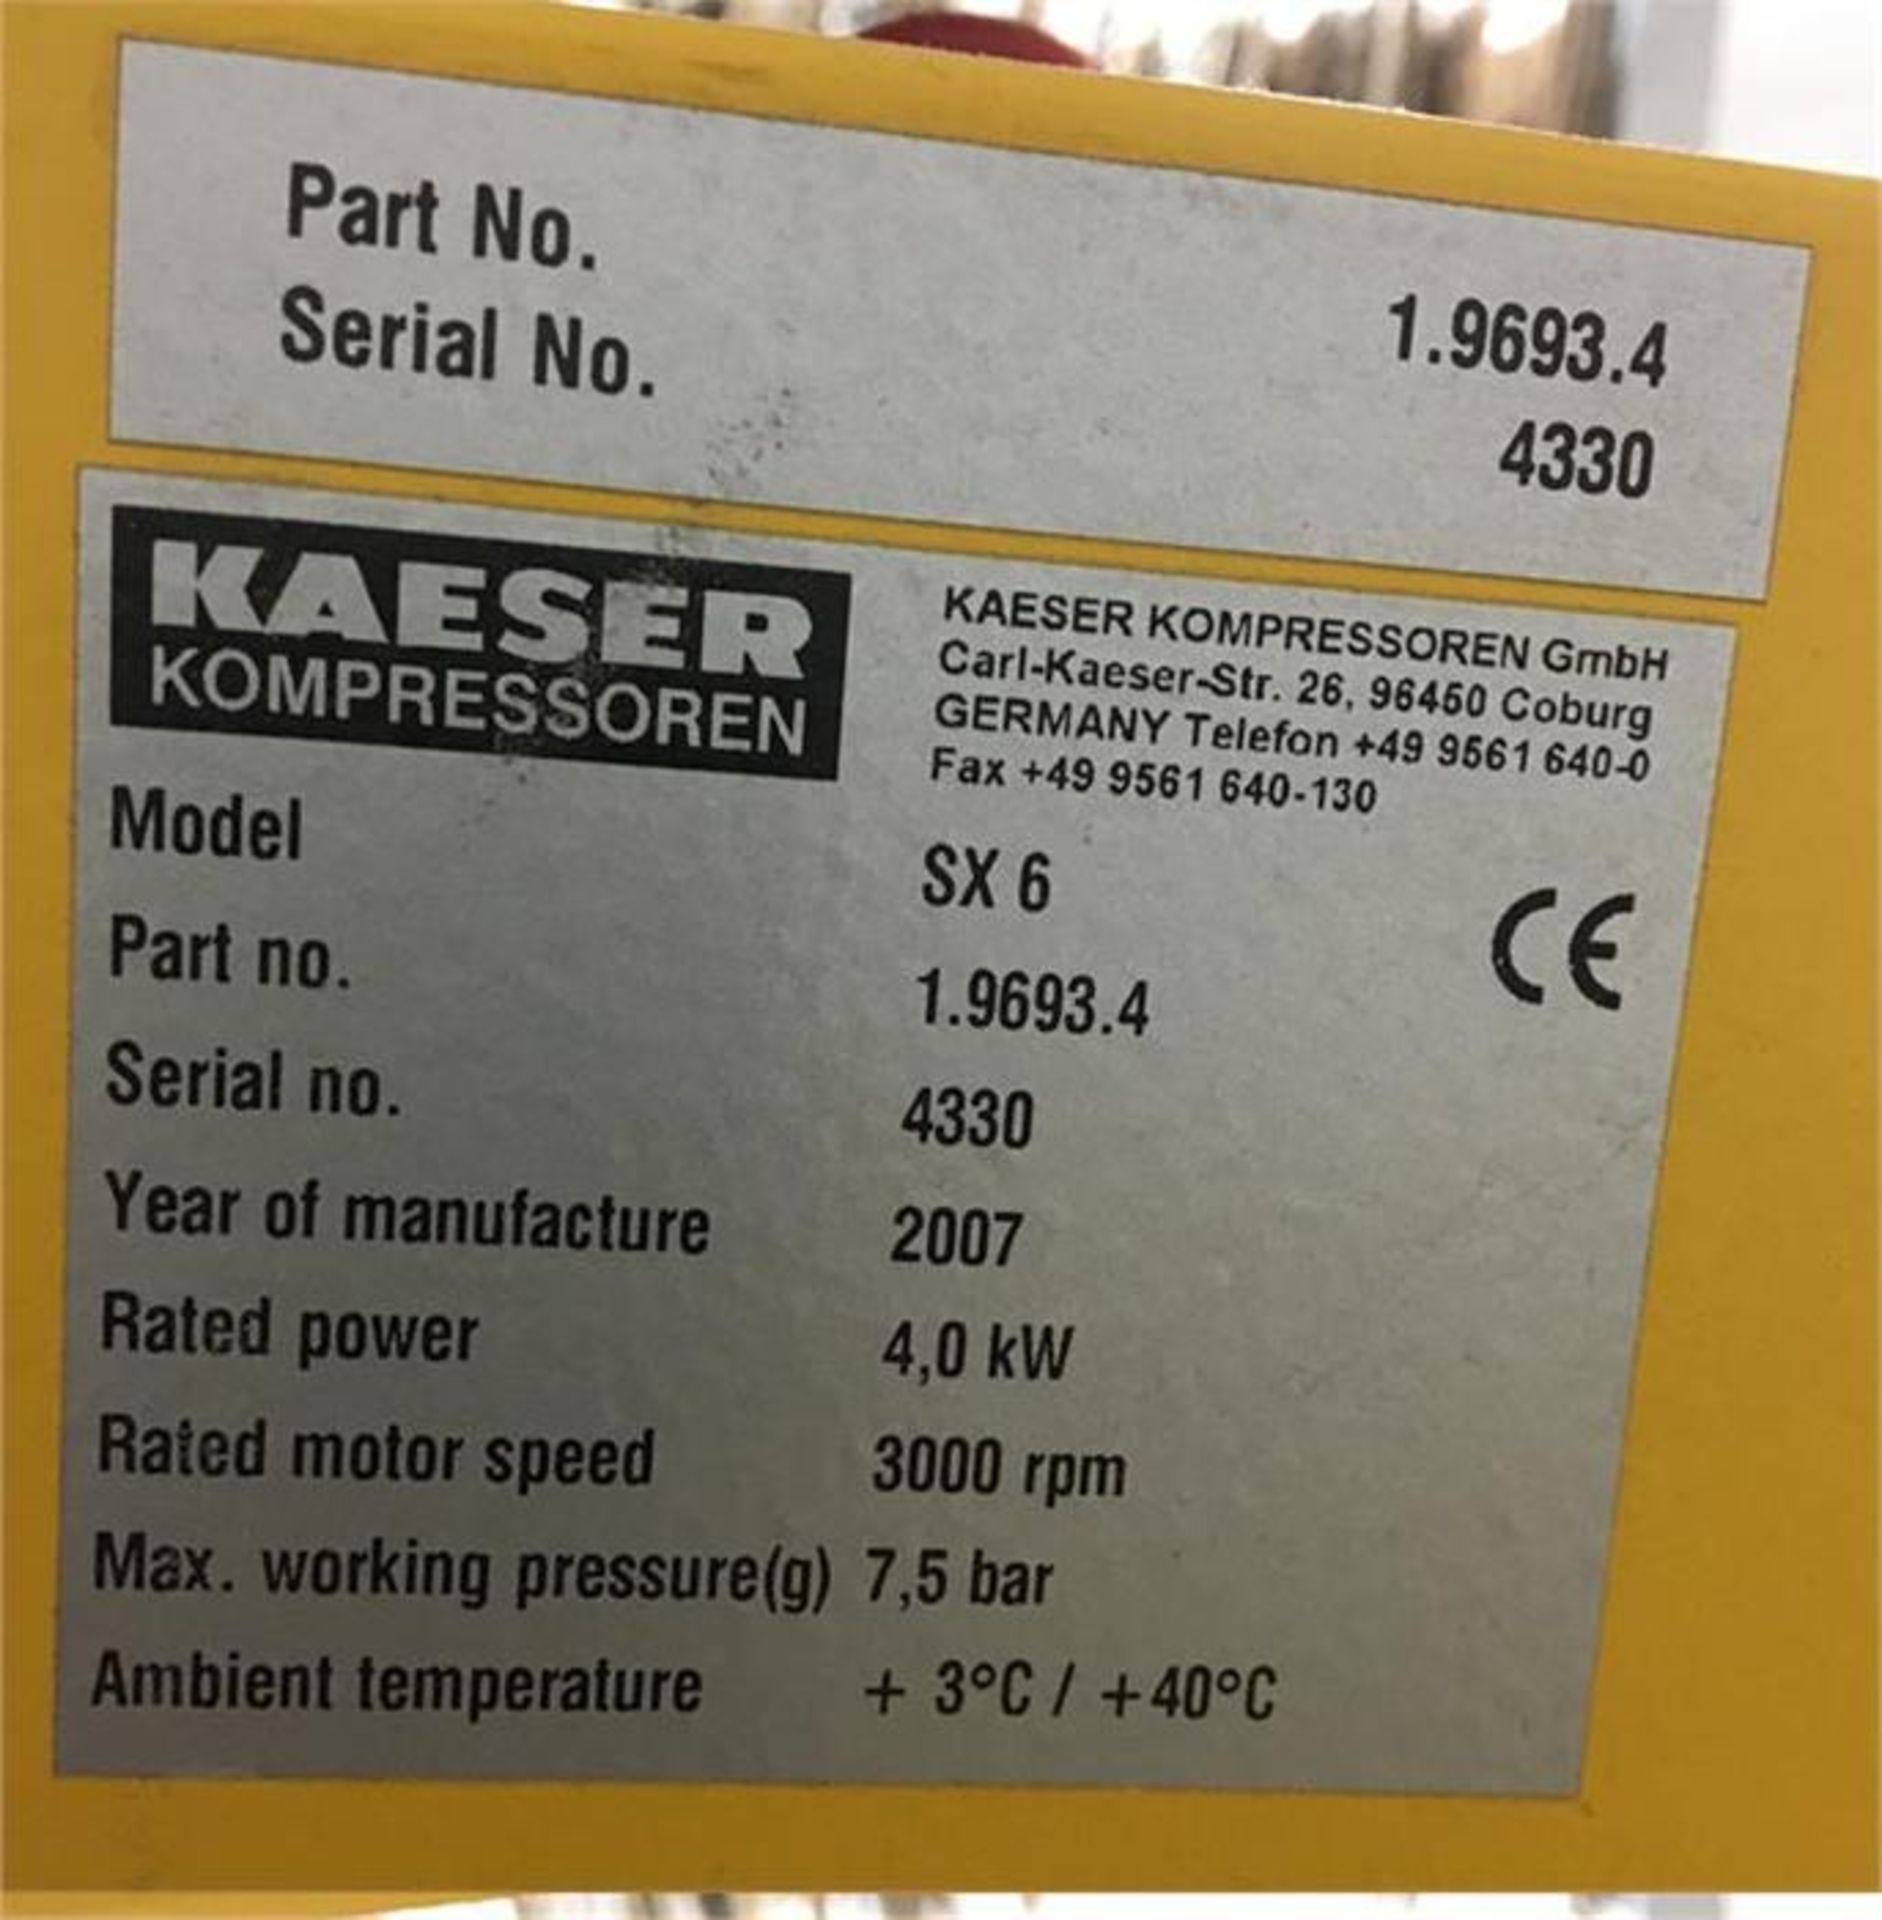 Kaeser SX6 rotary screw air compressor complete with Kaeser TAH6 dryer, Serial Number: 4330 Year: - Image 4 of 5